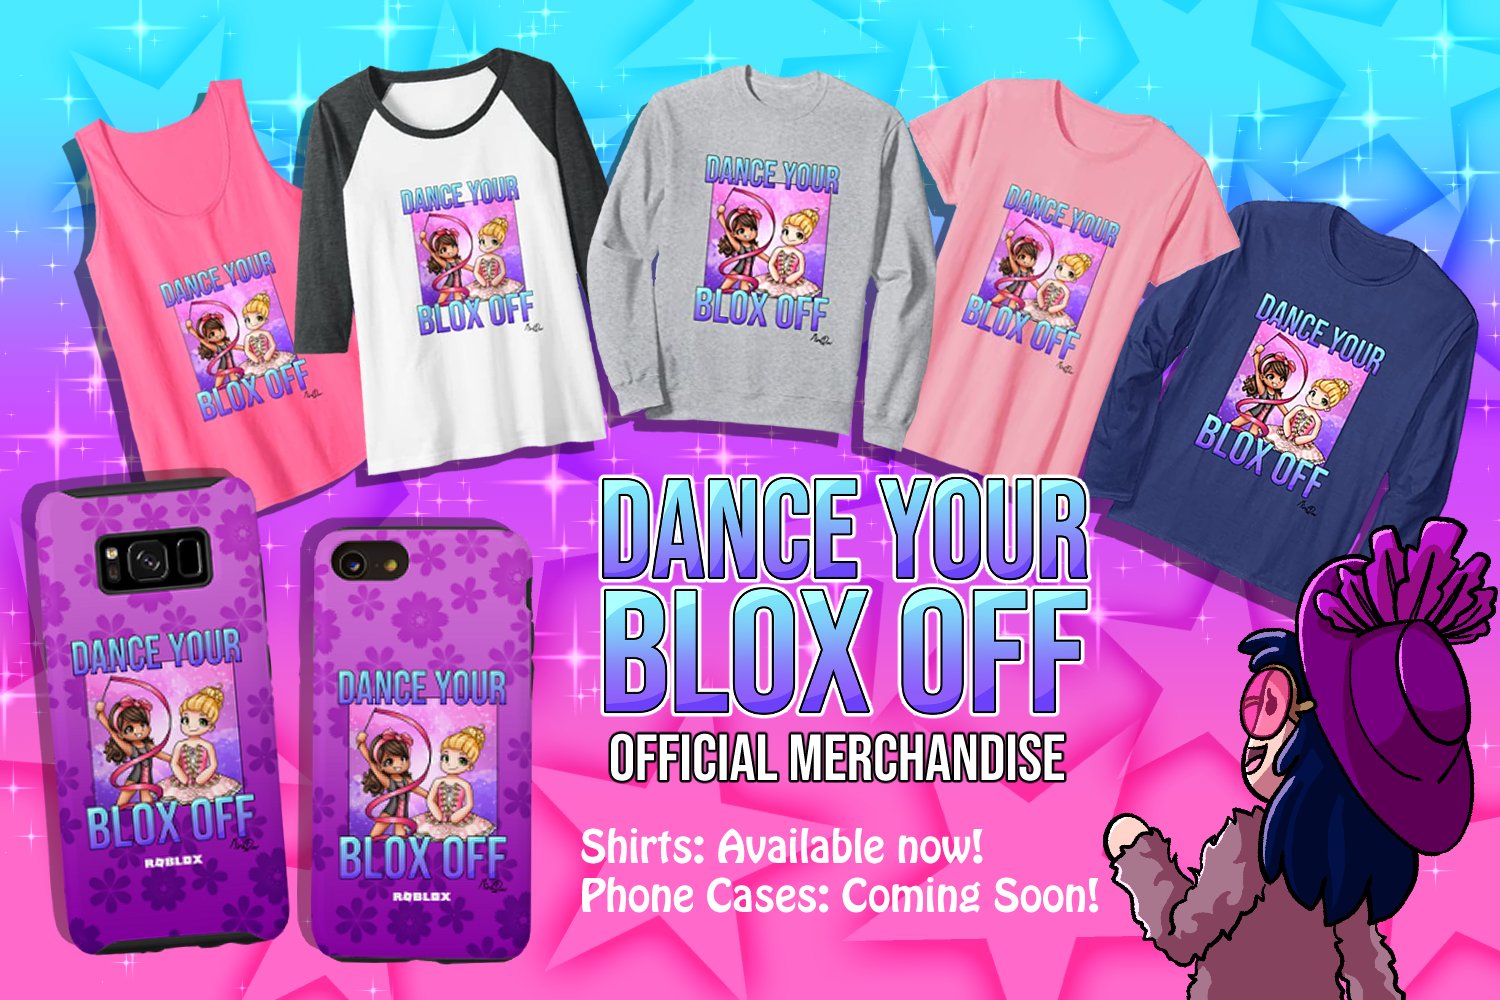 Mimi Dev On Twitter Super Excited To Finally Share This Dance Your Blox Off Now Has Official Merch On The Roblox Amazon Store Thank You Roblox For This Amazing Opportunity Robloxdev Check Out - dance your bloxes of site roblox.com